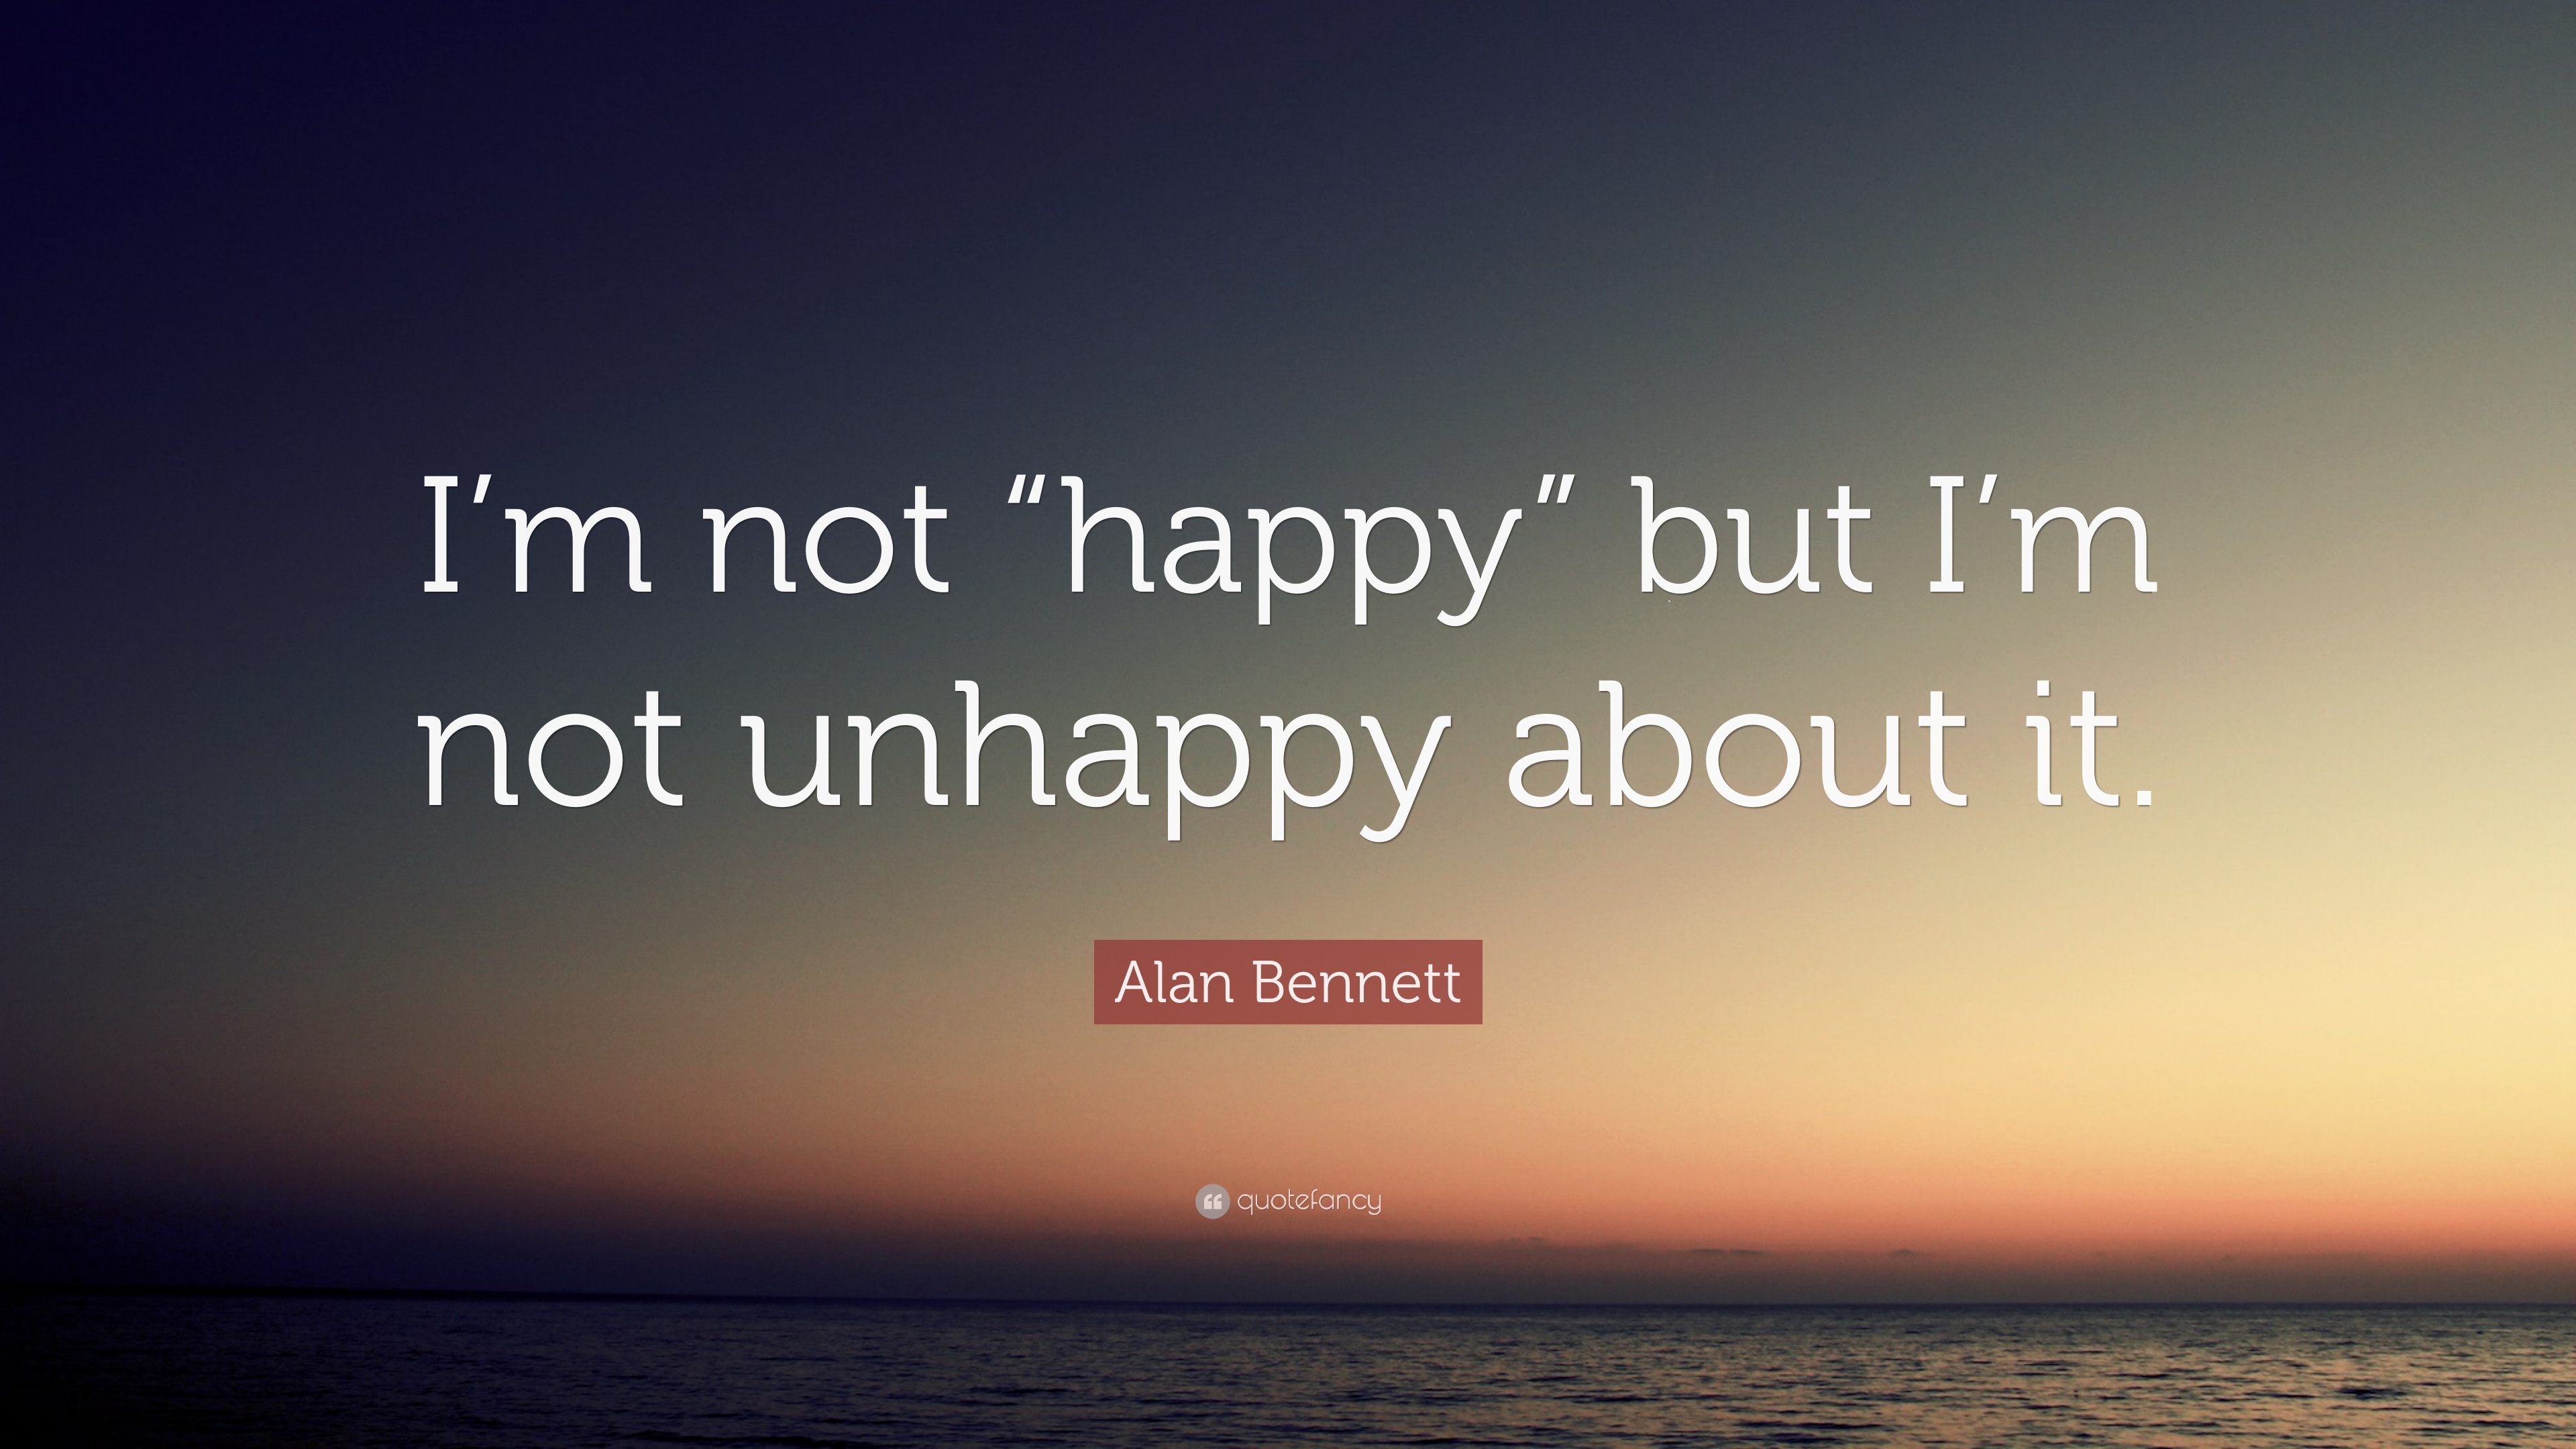 Alan Bennett Quote: “I'm not “happy” but I'm not unhappy about it ...